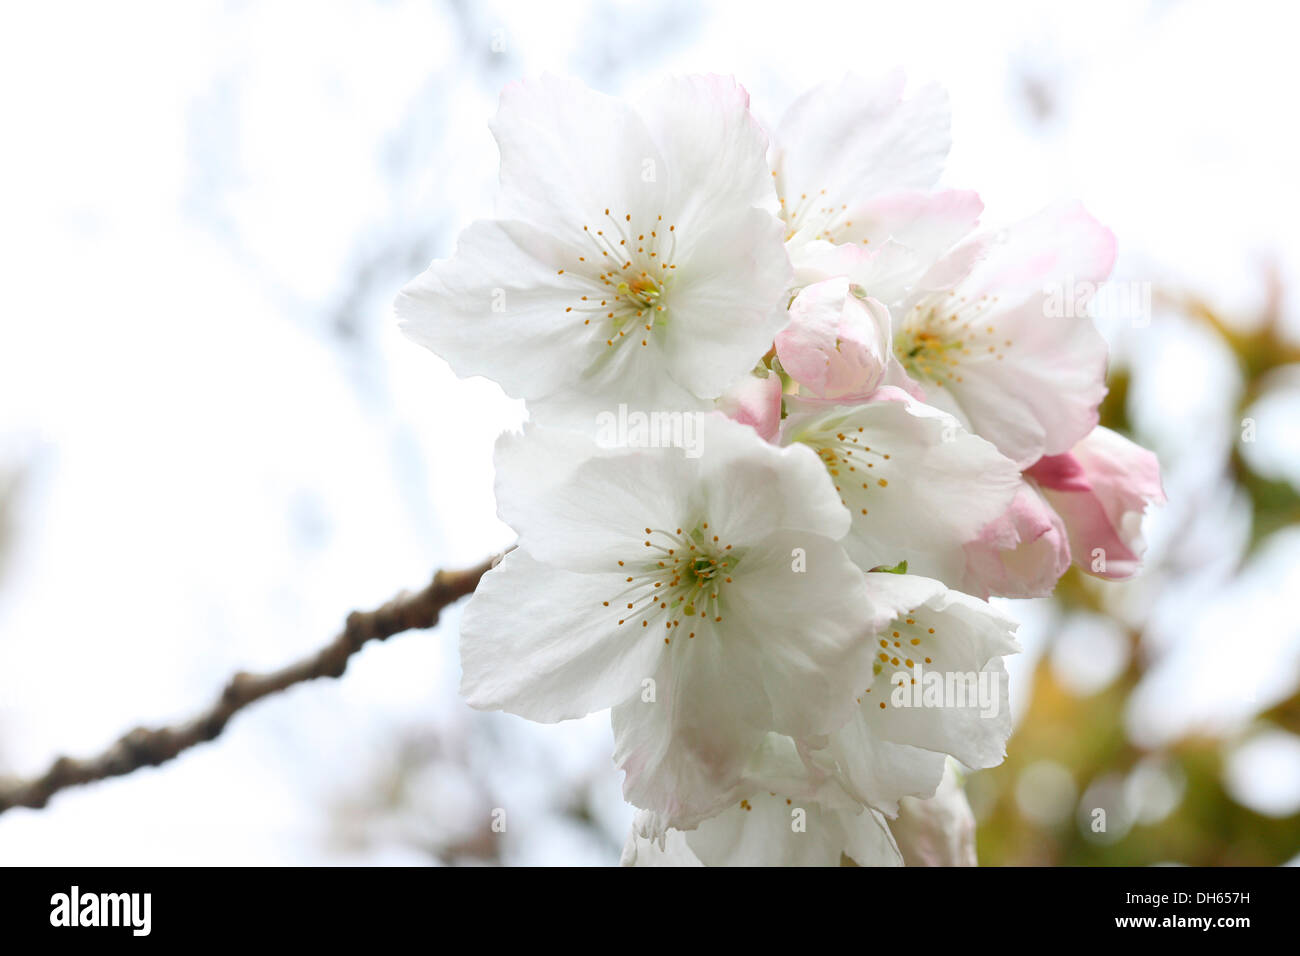 a taste of spring, beautiful clusters of great white cherry blossom Tai Haku  Jane Ann Butler Photography JABP1018 Stock Photo